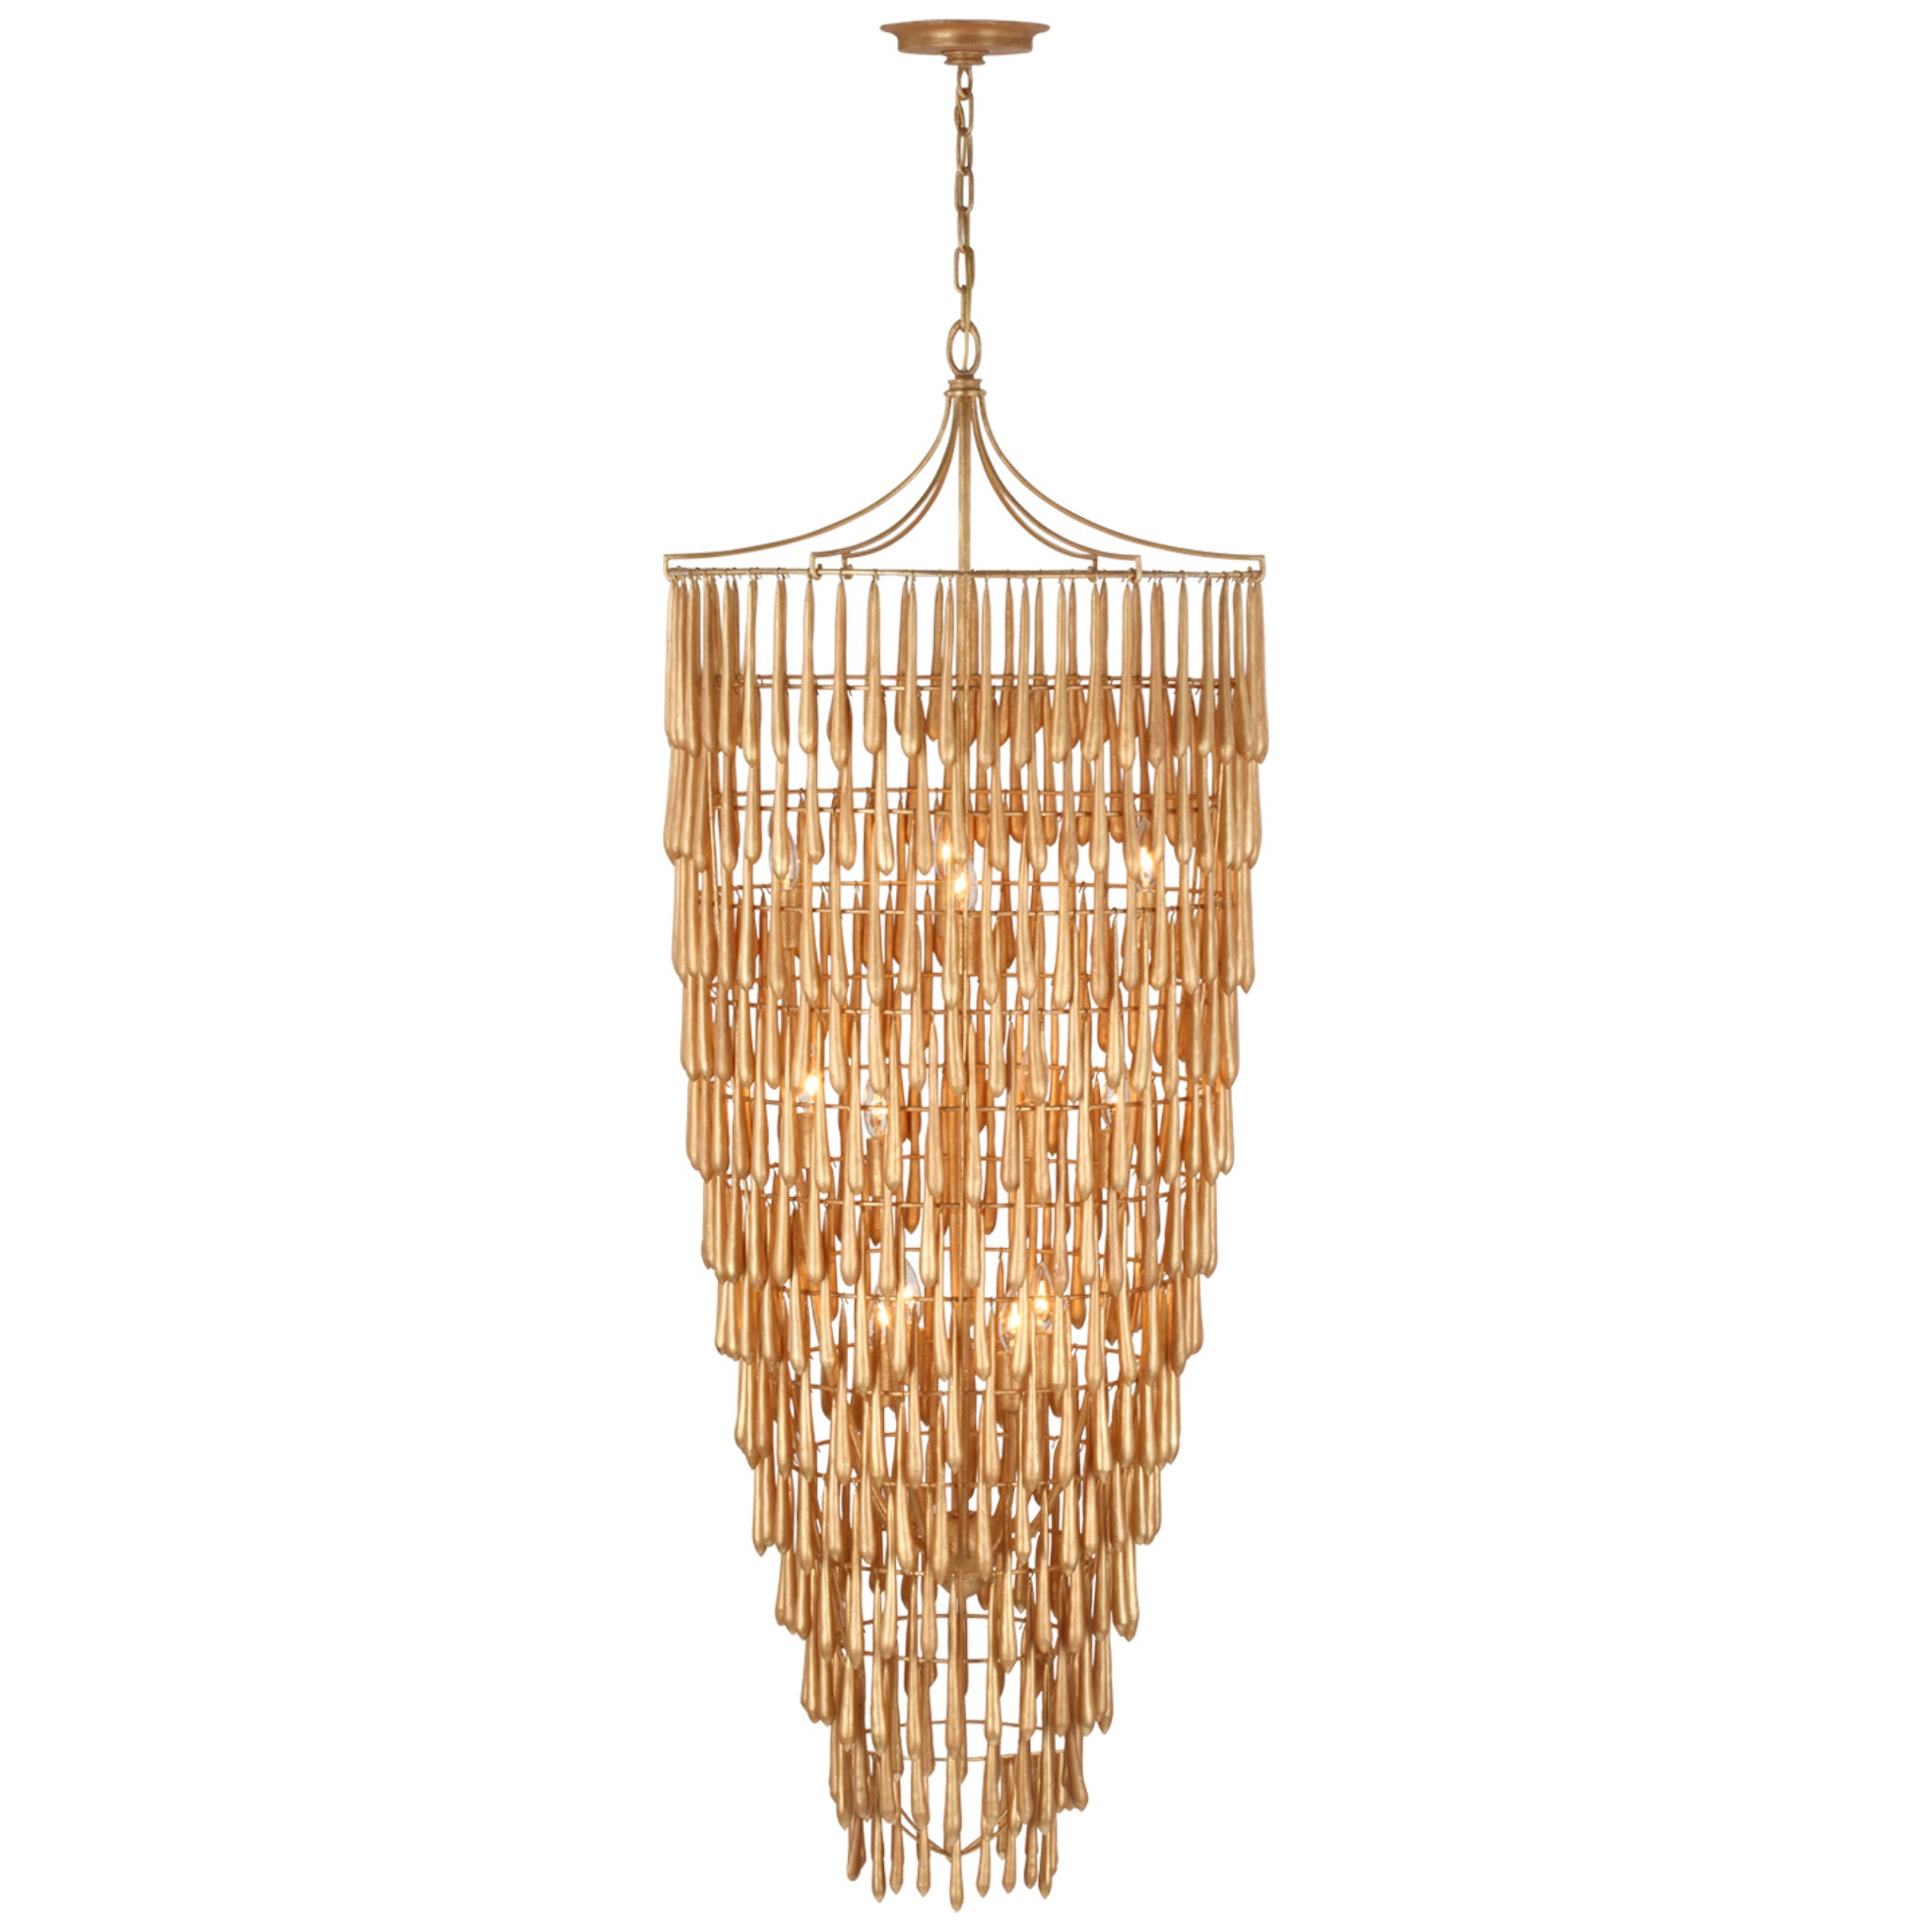 Julie Neill Vacarro Tall Cascading Chandelier in Antique Gold Leaf